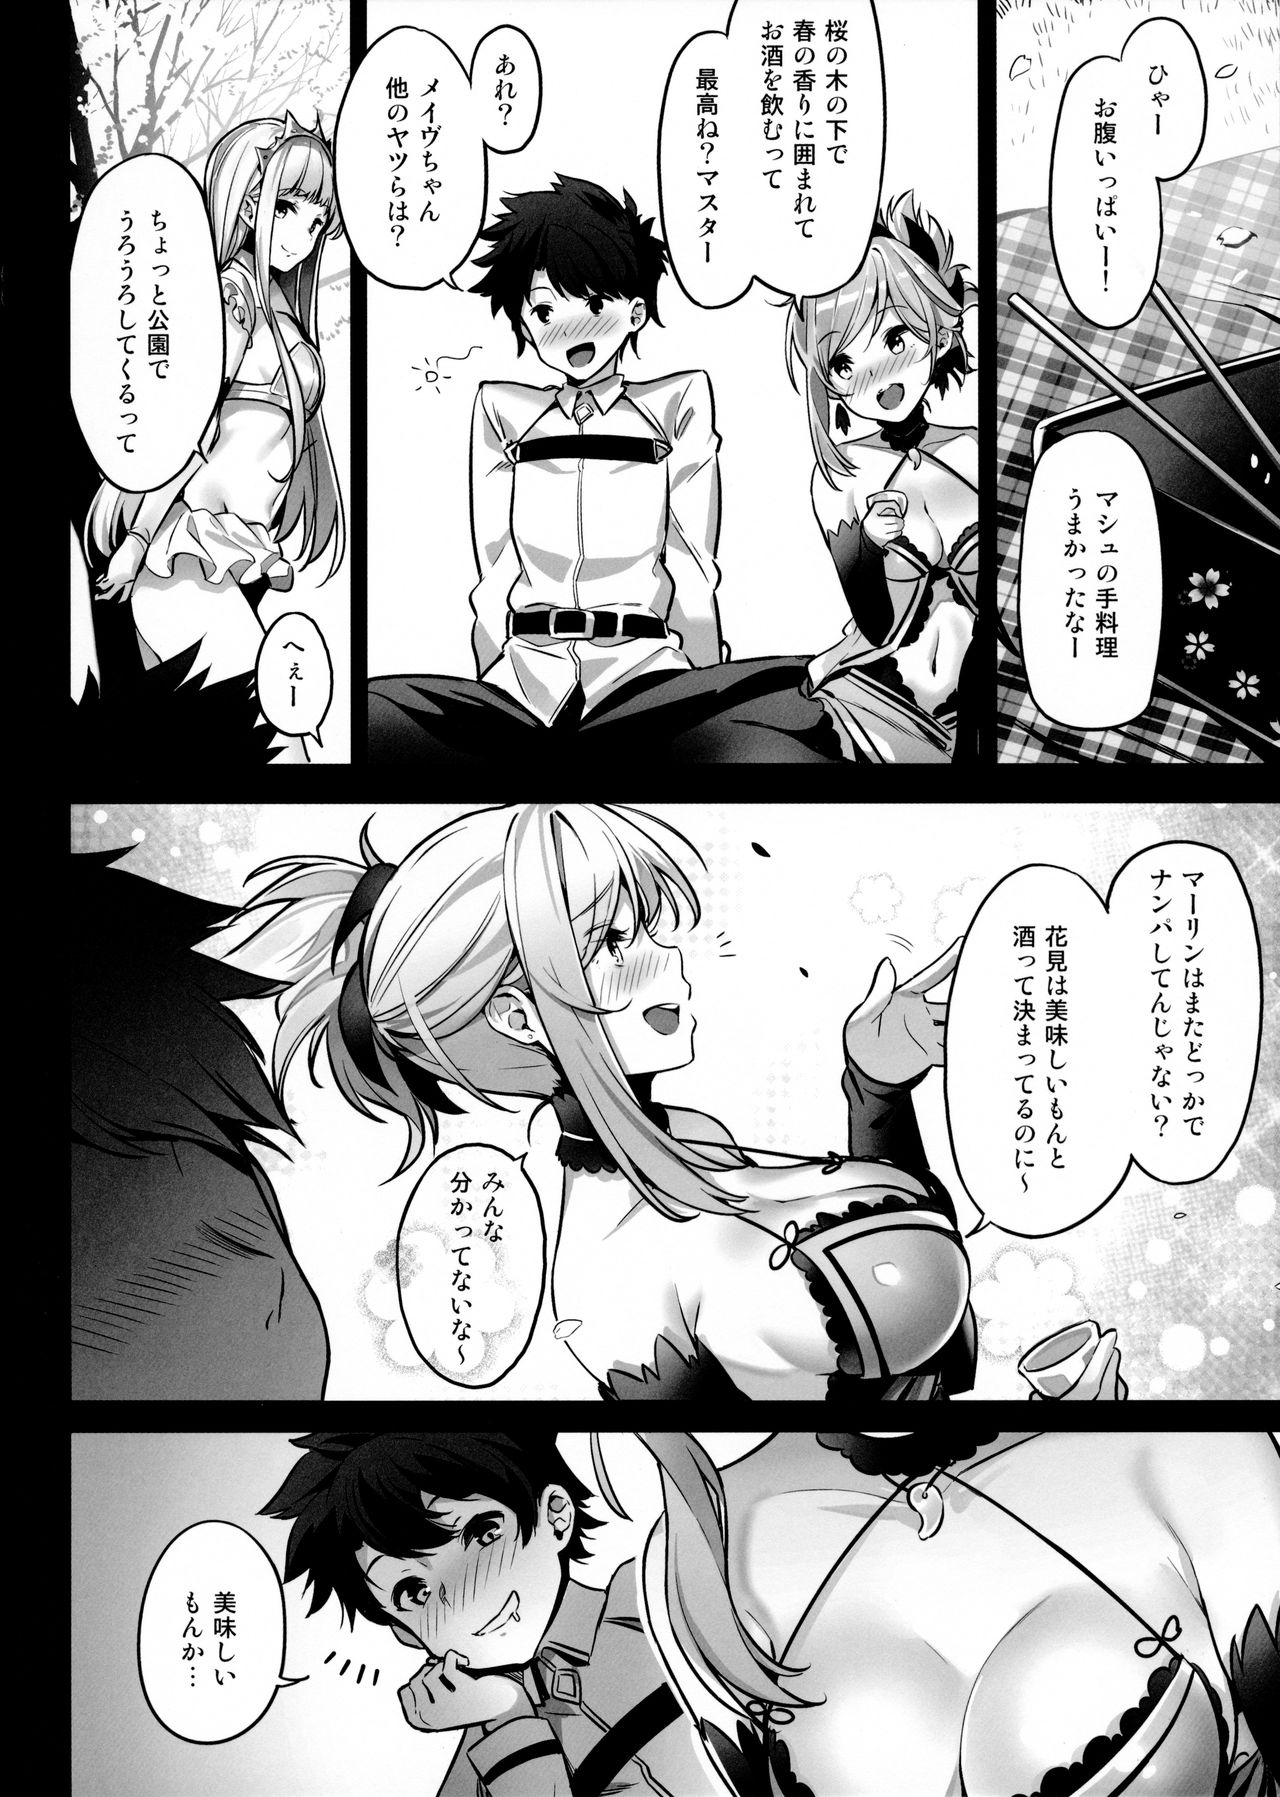 (COMIC1☆11) [MoonPhase (ゆらん)] moon phase material (Fate/Grand Order)